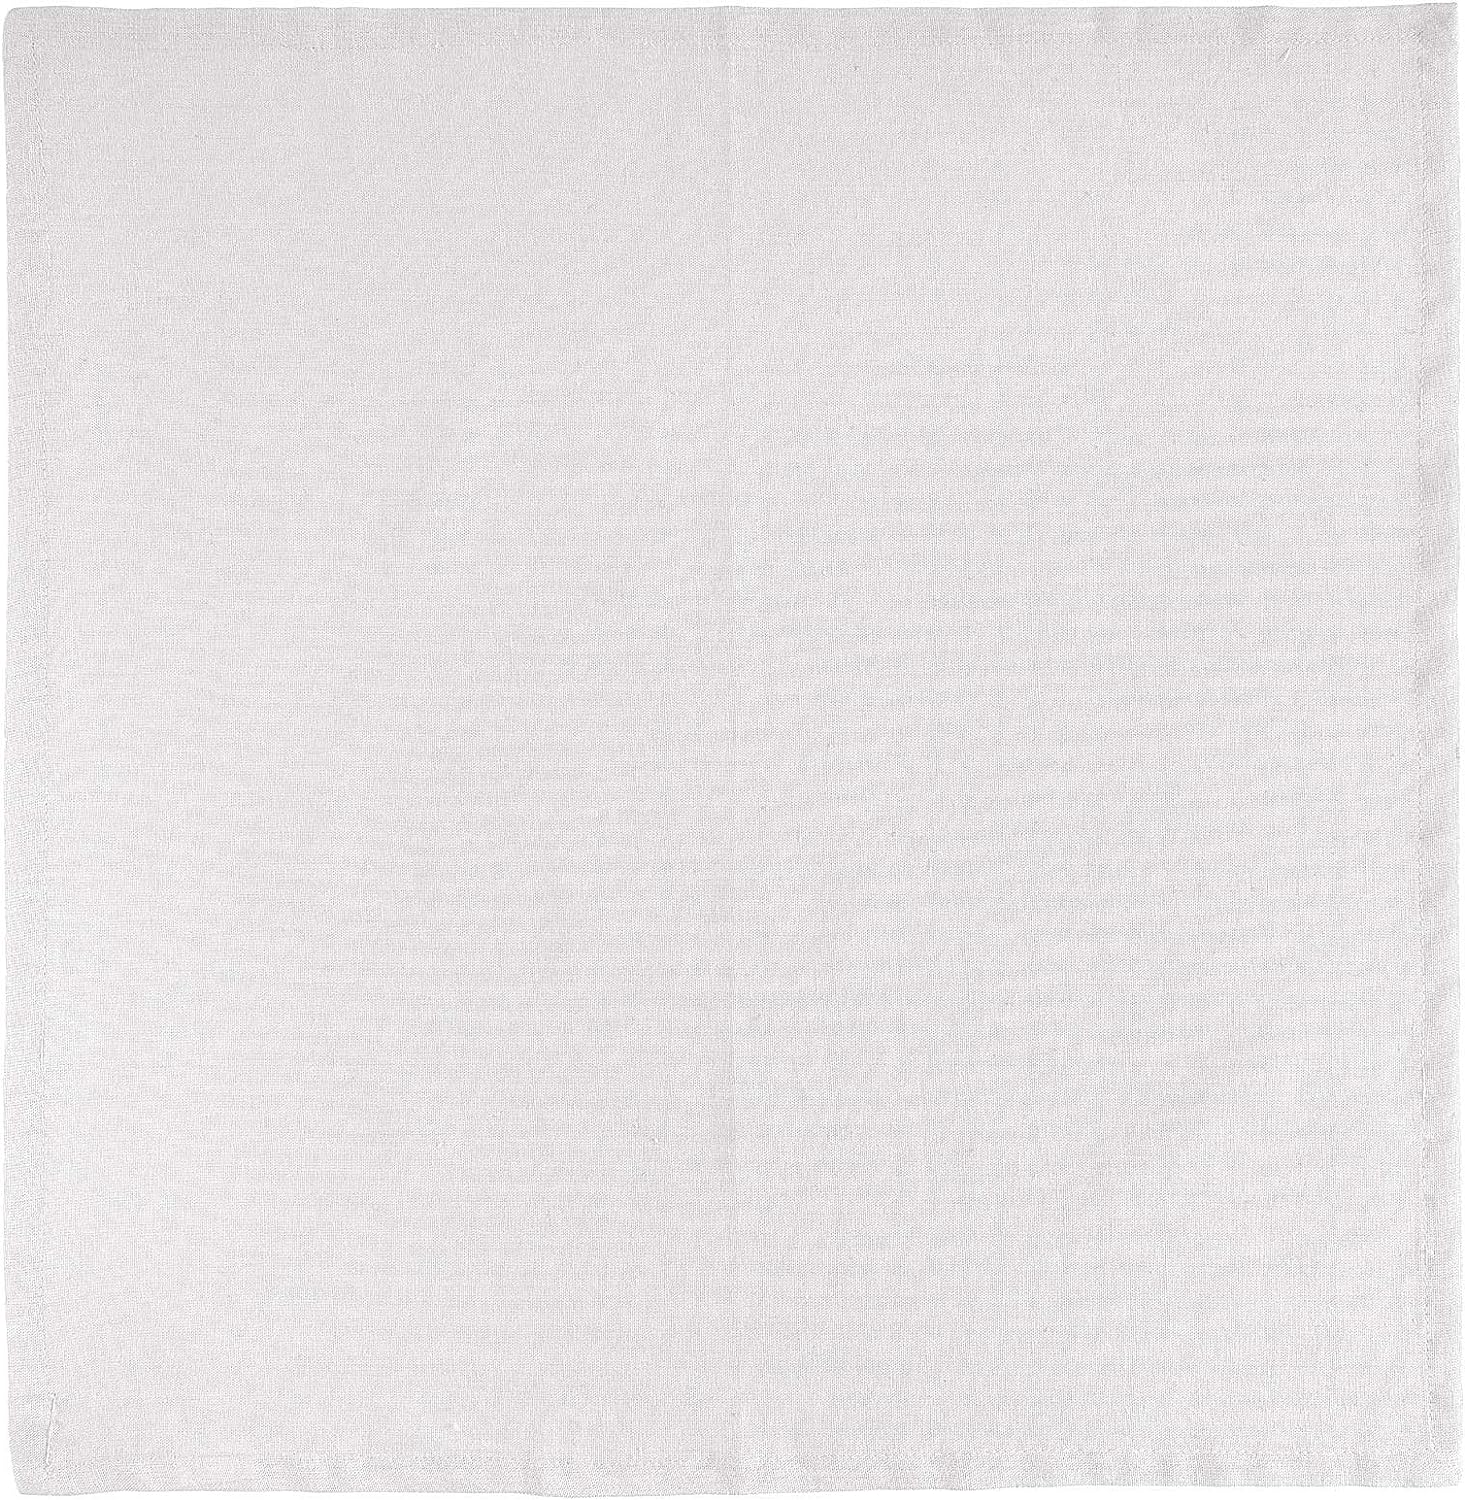 FINGERCRAFT Dinner Cloth Napkins, Cotton Linen Blend Fabric 12 Pack White Easter Special, Premium Quality, Mitered Corners for Every Day Use Napkins are Pre Shrunk and Good Absorbency White 7